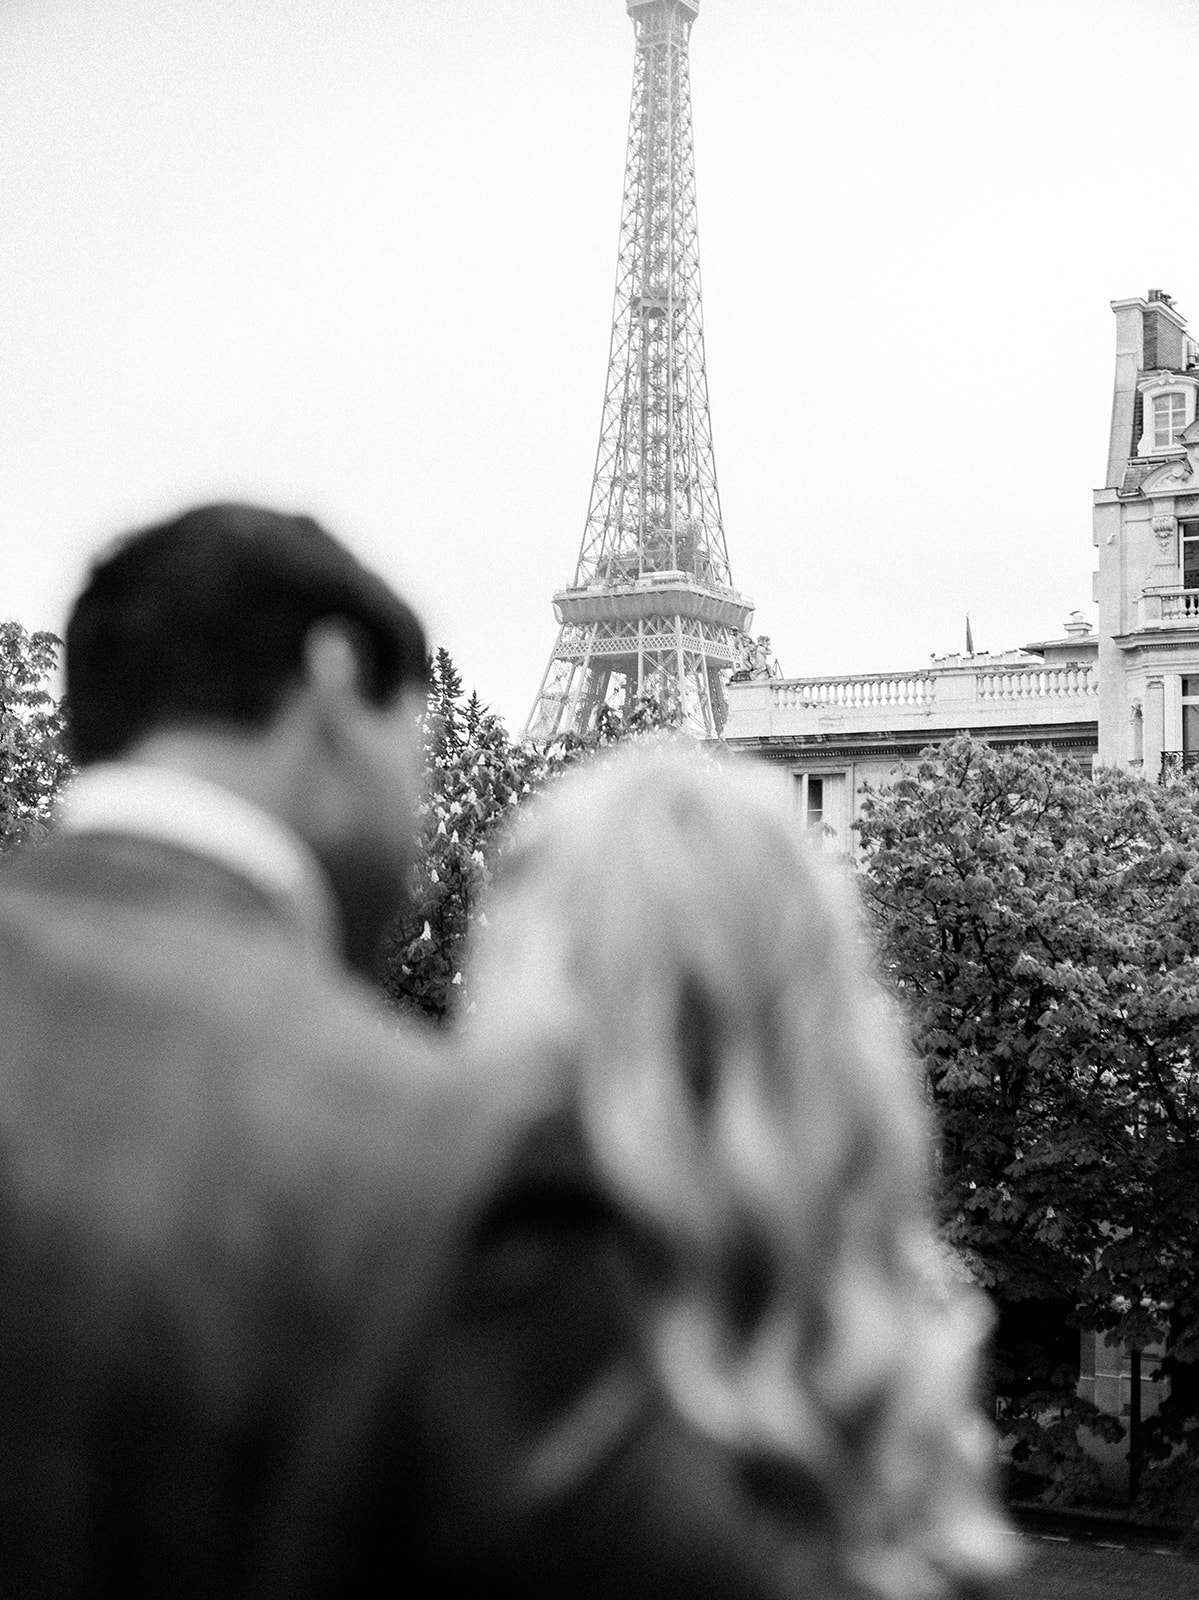 Silhouette of couple with Eiffel Tower in background.